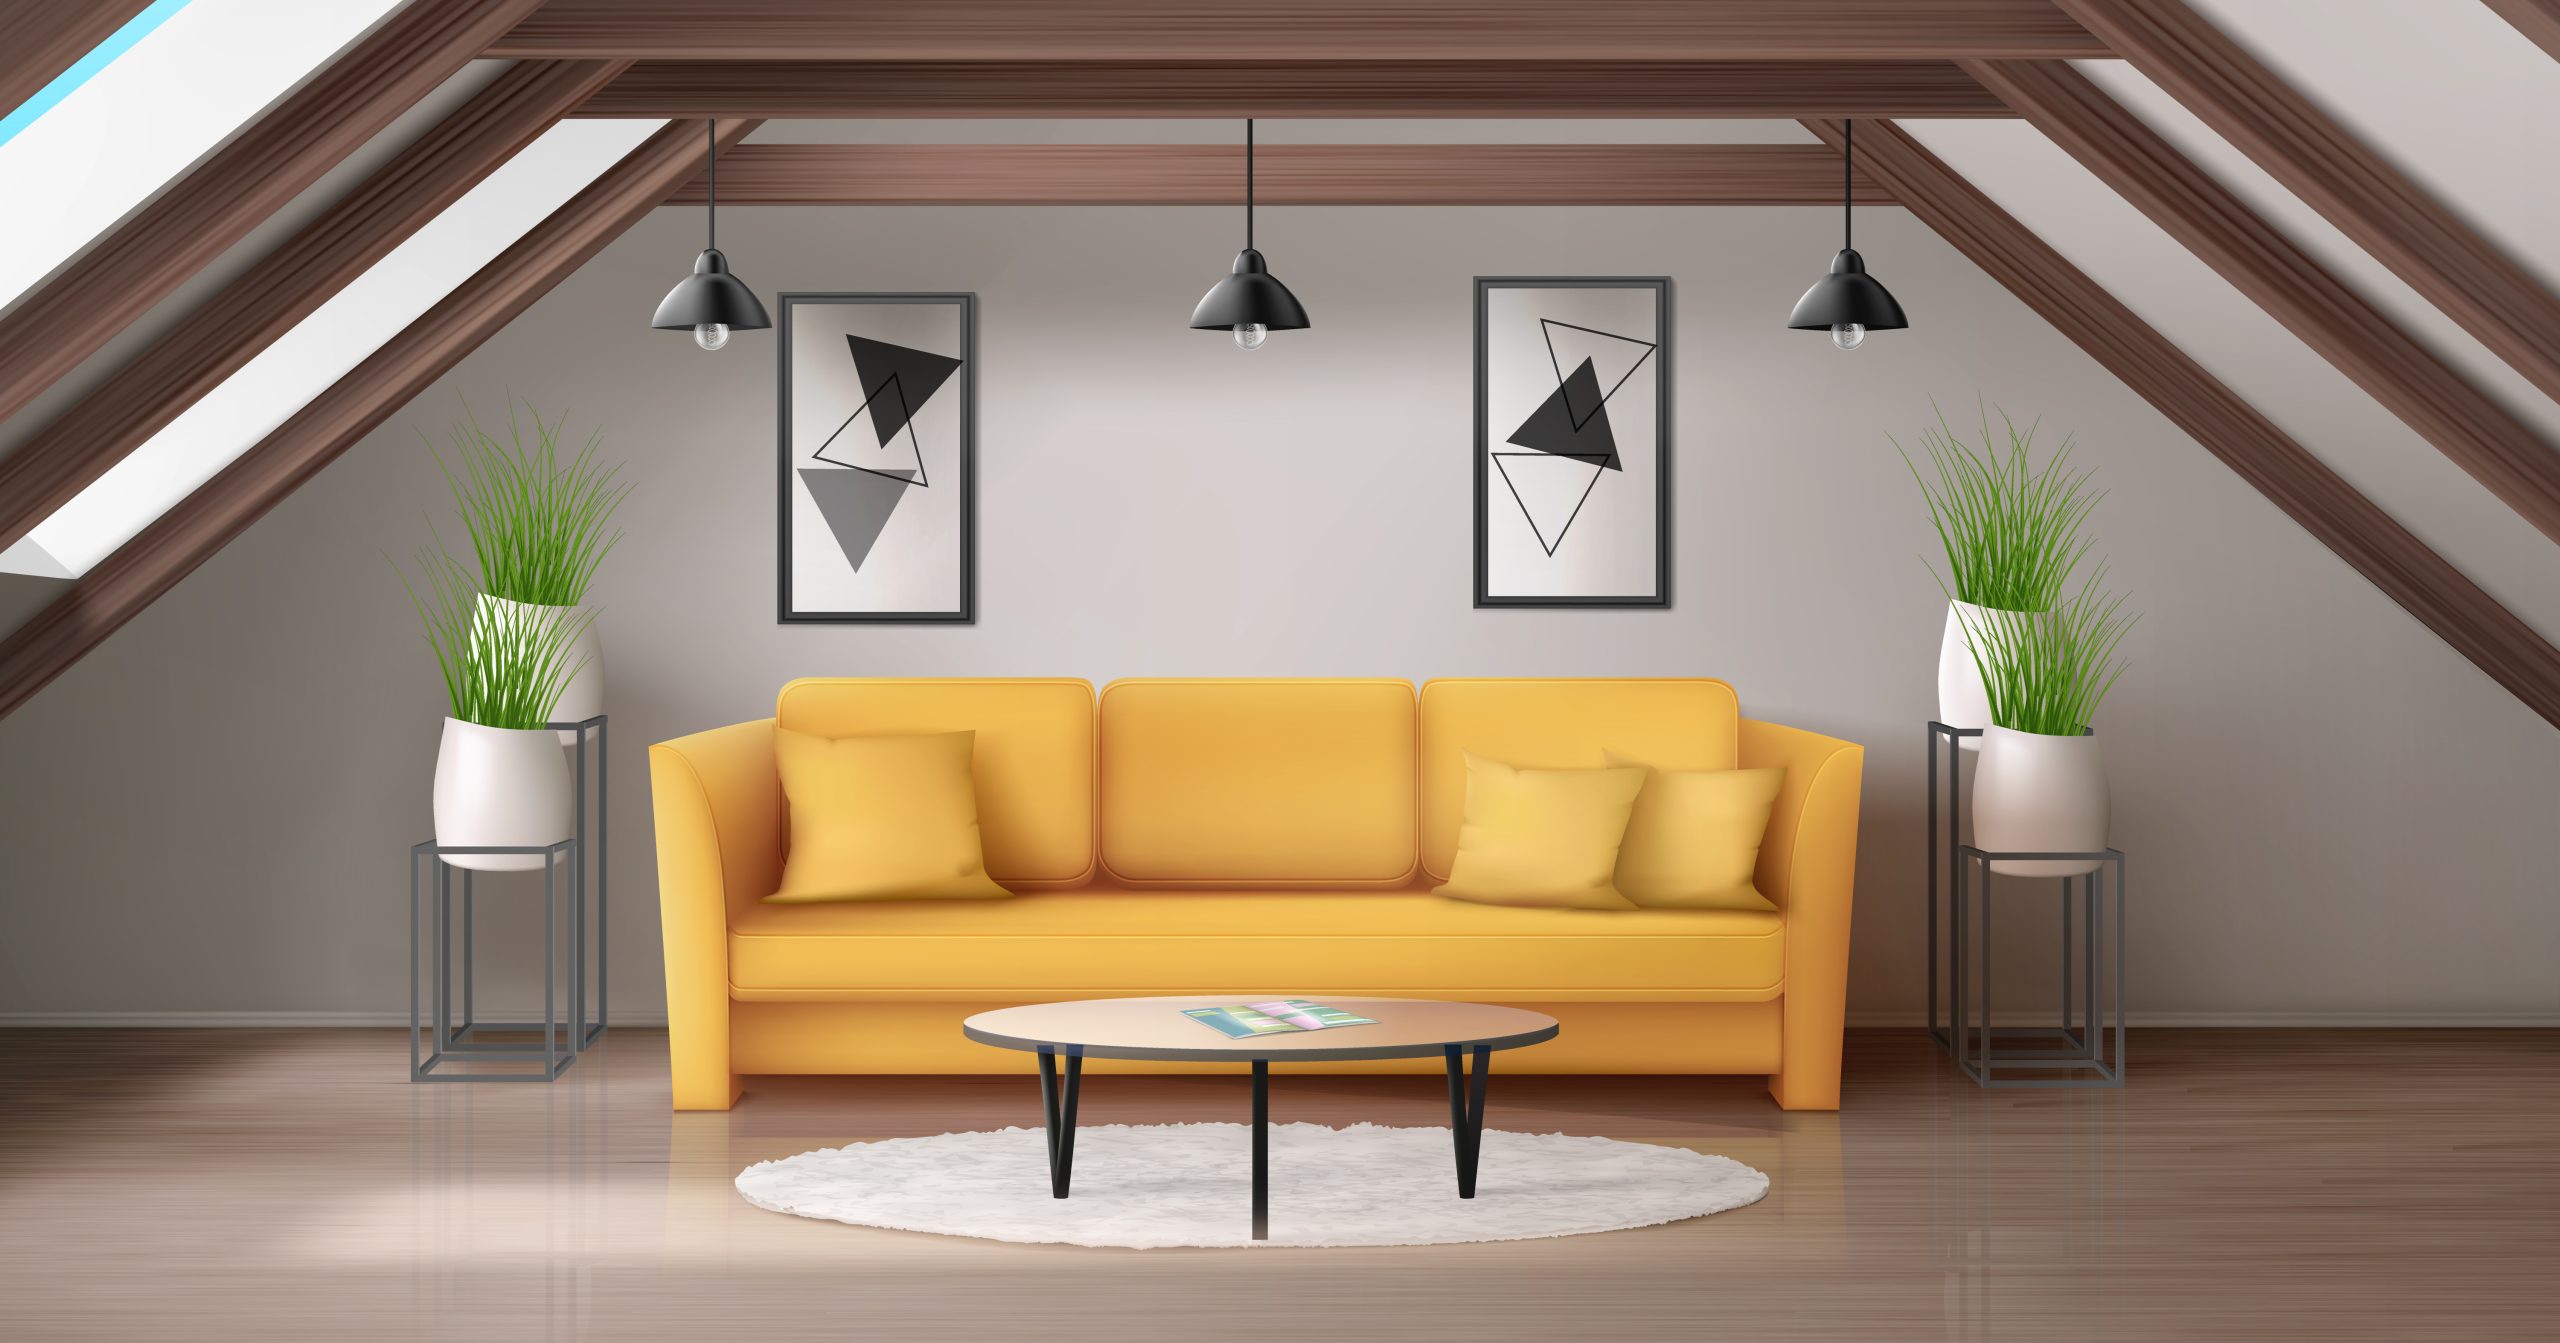 7 Benefits Of 3D Modeling For The Furniture Industry